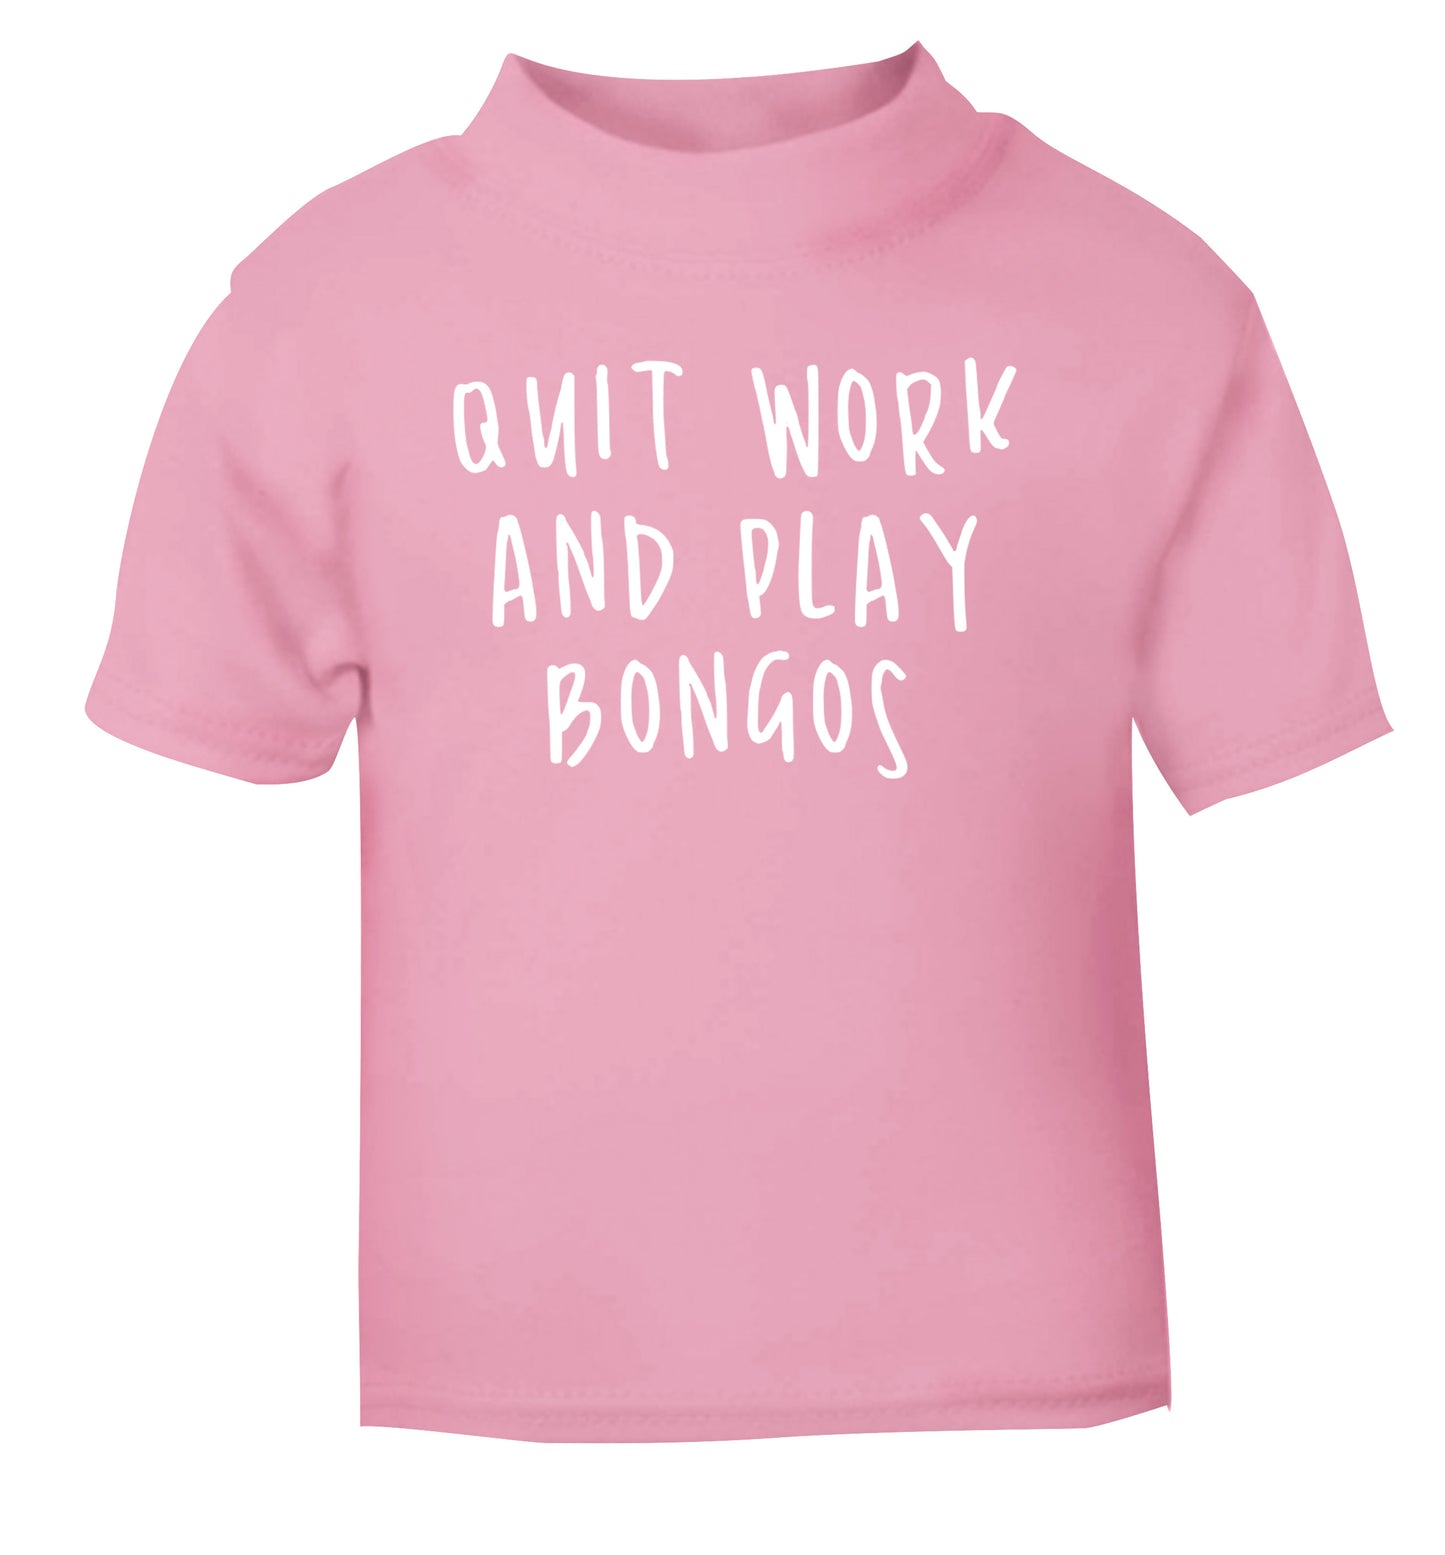 Quit work and play bongos light pink Baby Toddler Tshirt 2 Years